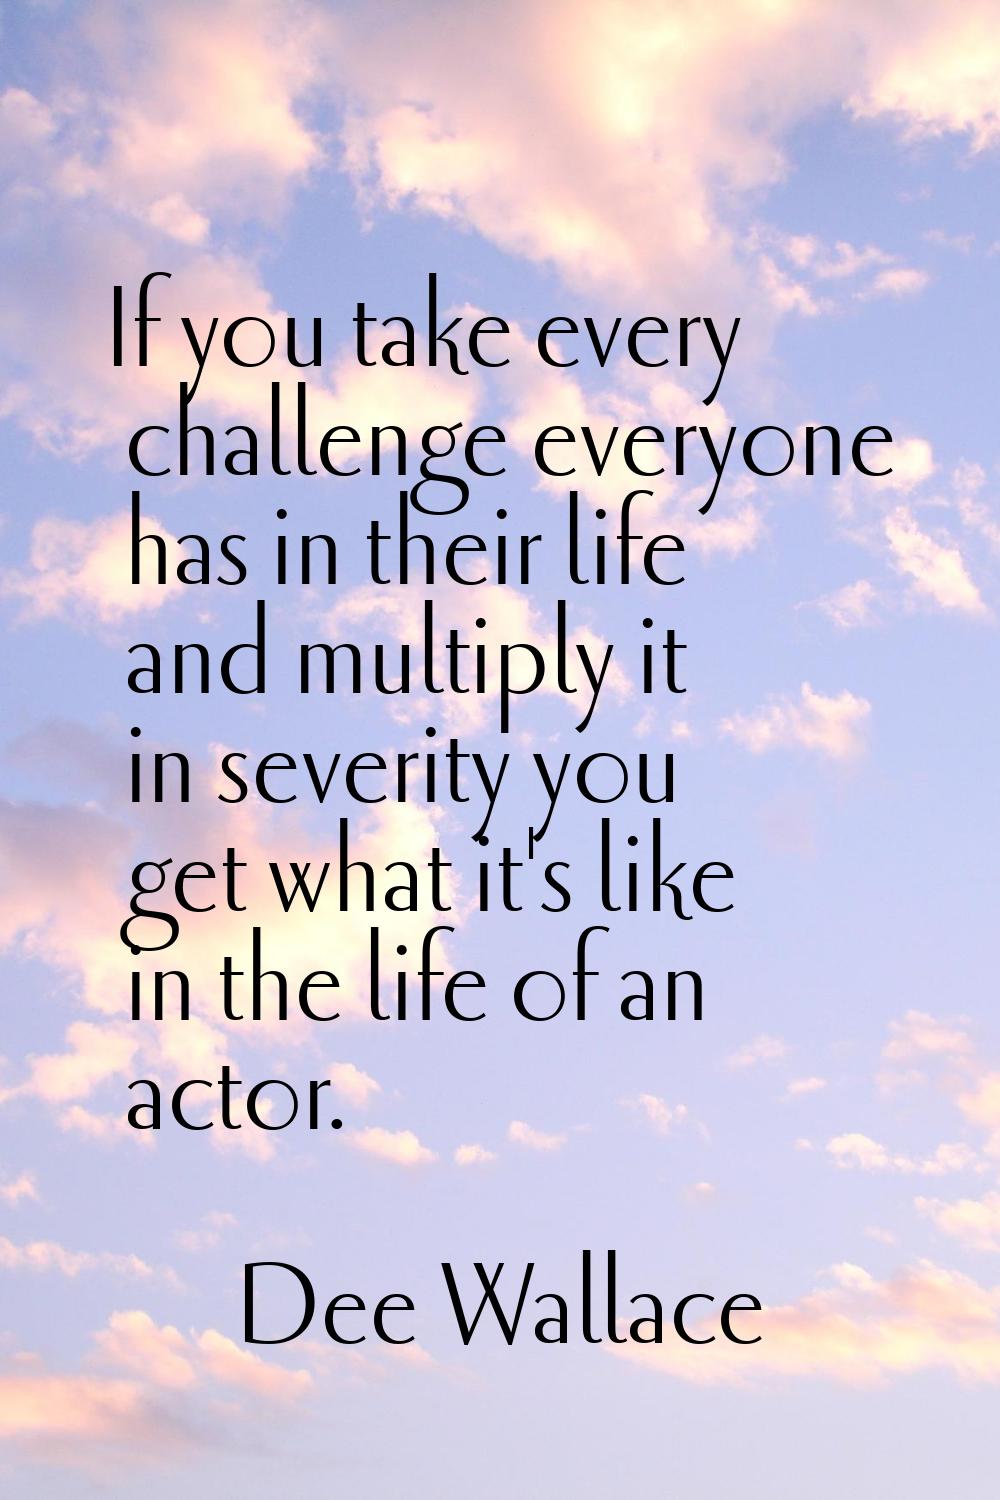 If you take every challenge everyone has in their life and multiply it in severity you get what it'